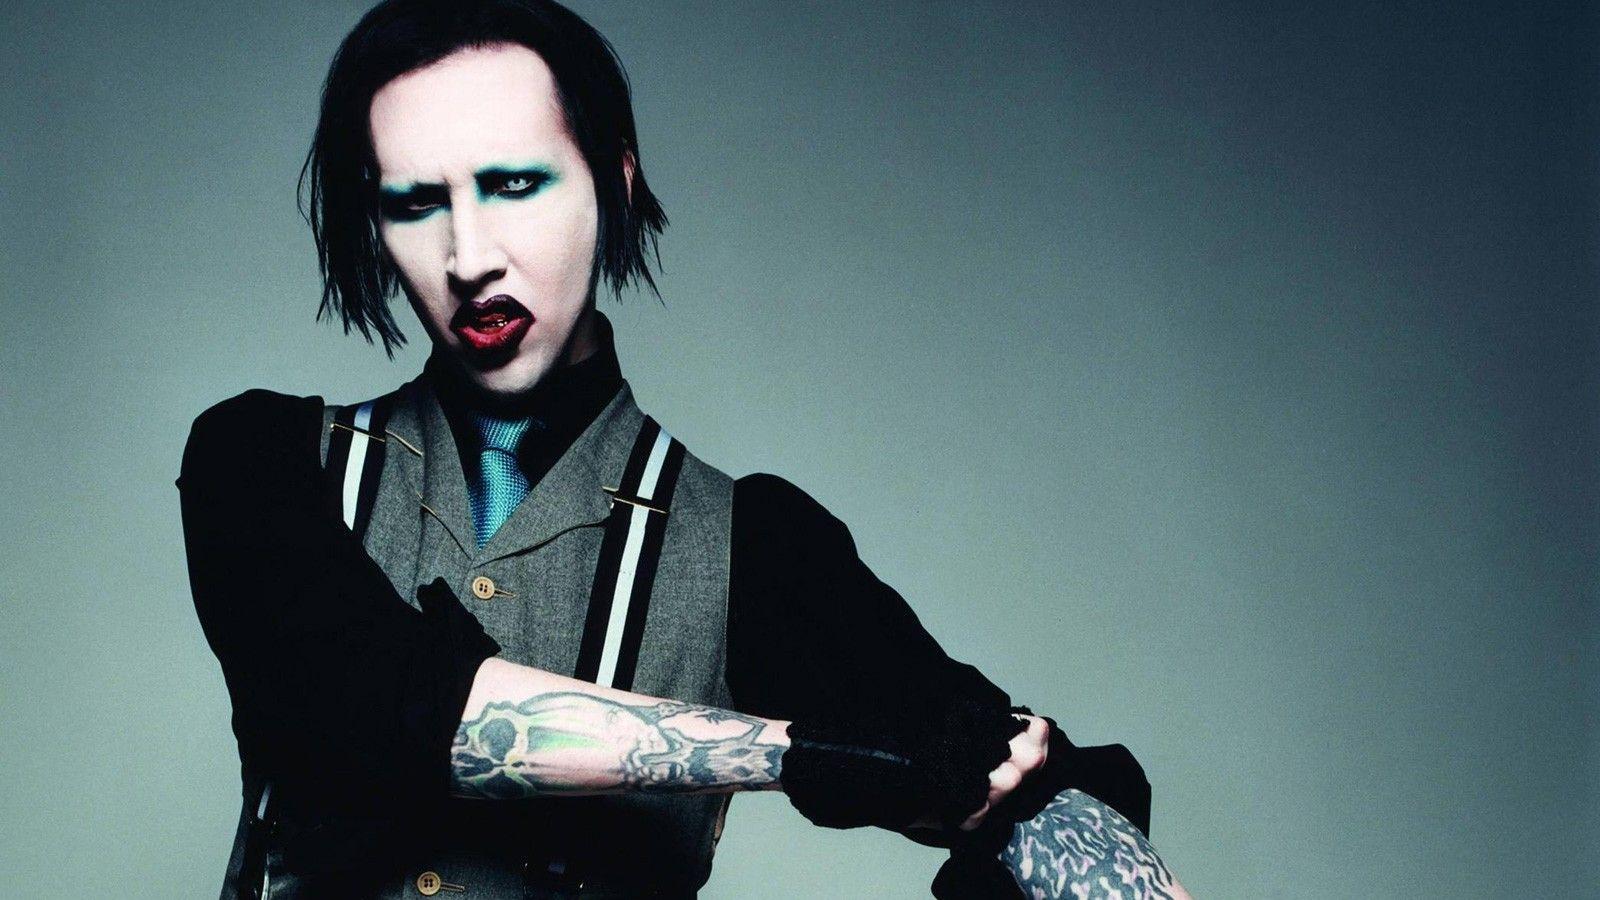 Marilyn Manson has announced new album 'Say10' for Valentines Day